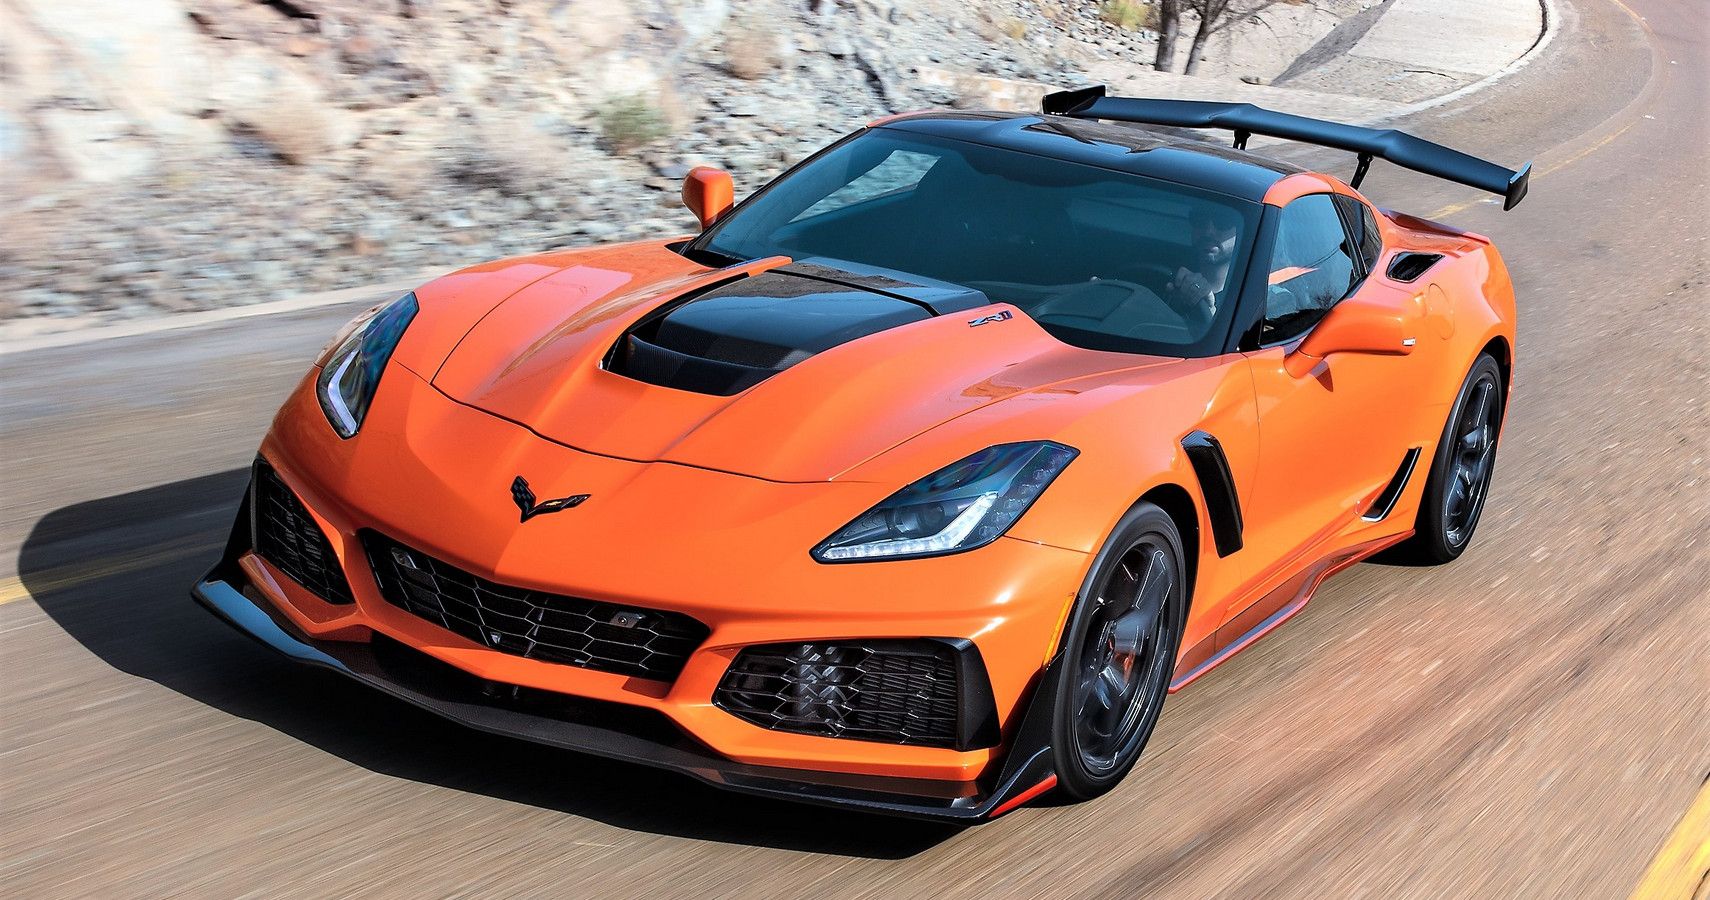 Rev Up Your Engines With The Ultimate List Of The Top 10 Chevy